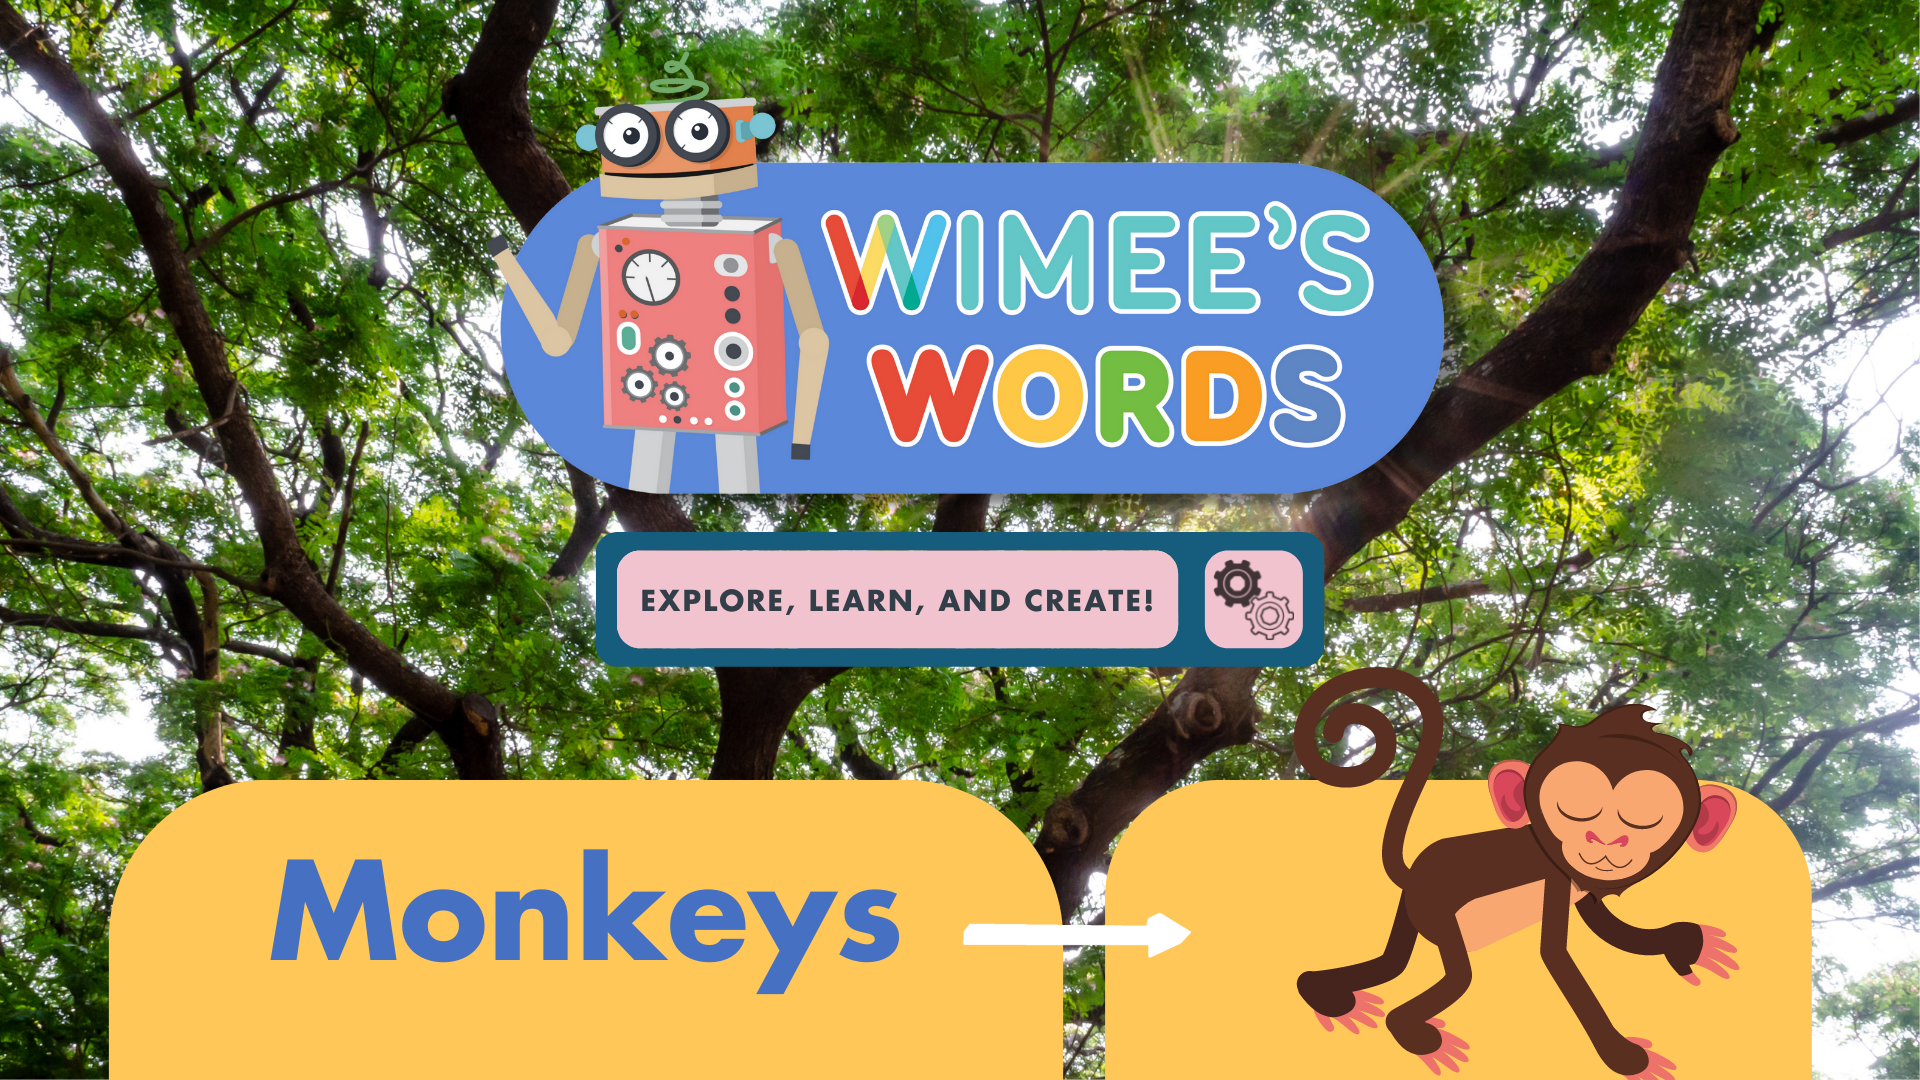 A photo of a tree looking thrpught the branches. The Wimee's Words logo, a graphic of a monkey, and the title "Monkey" are over the image.